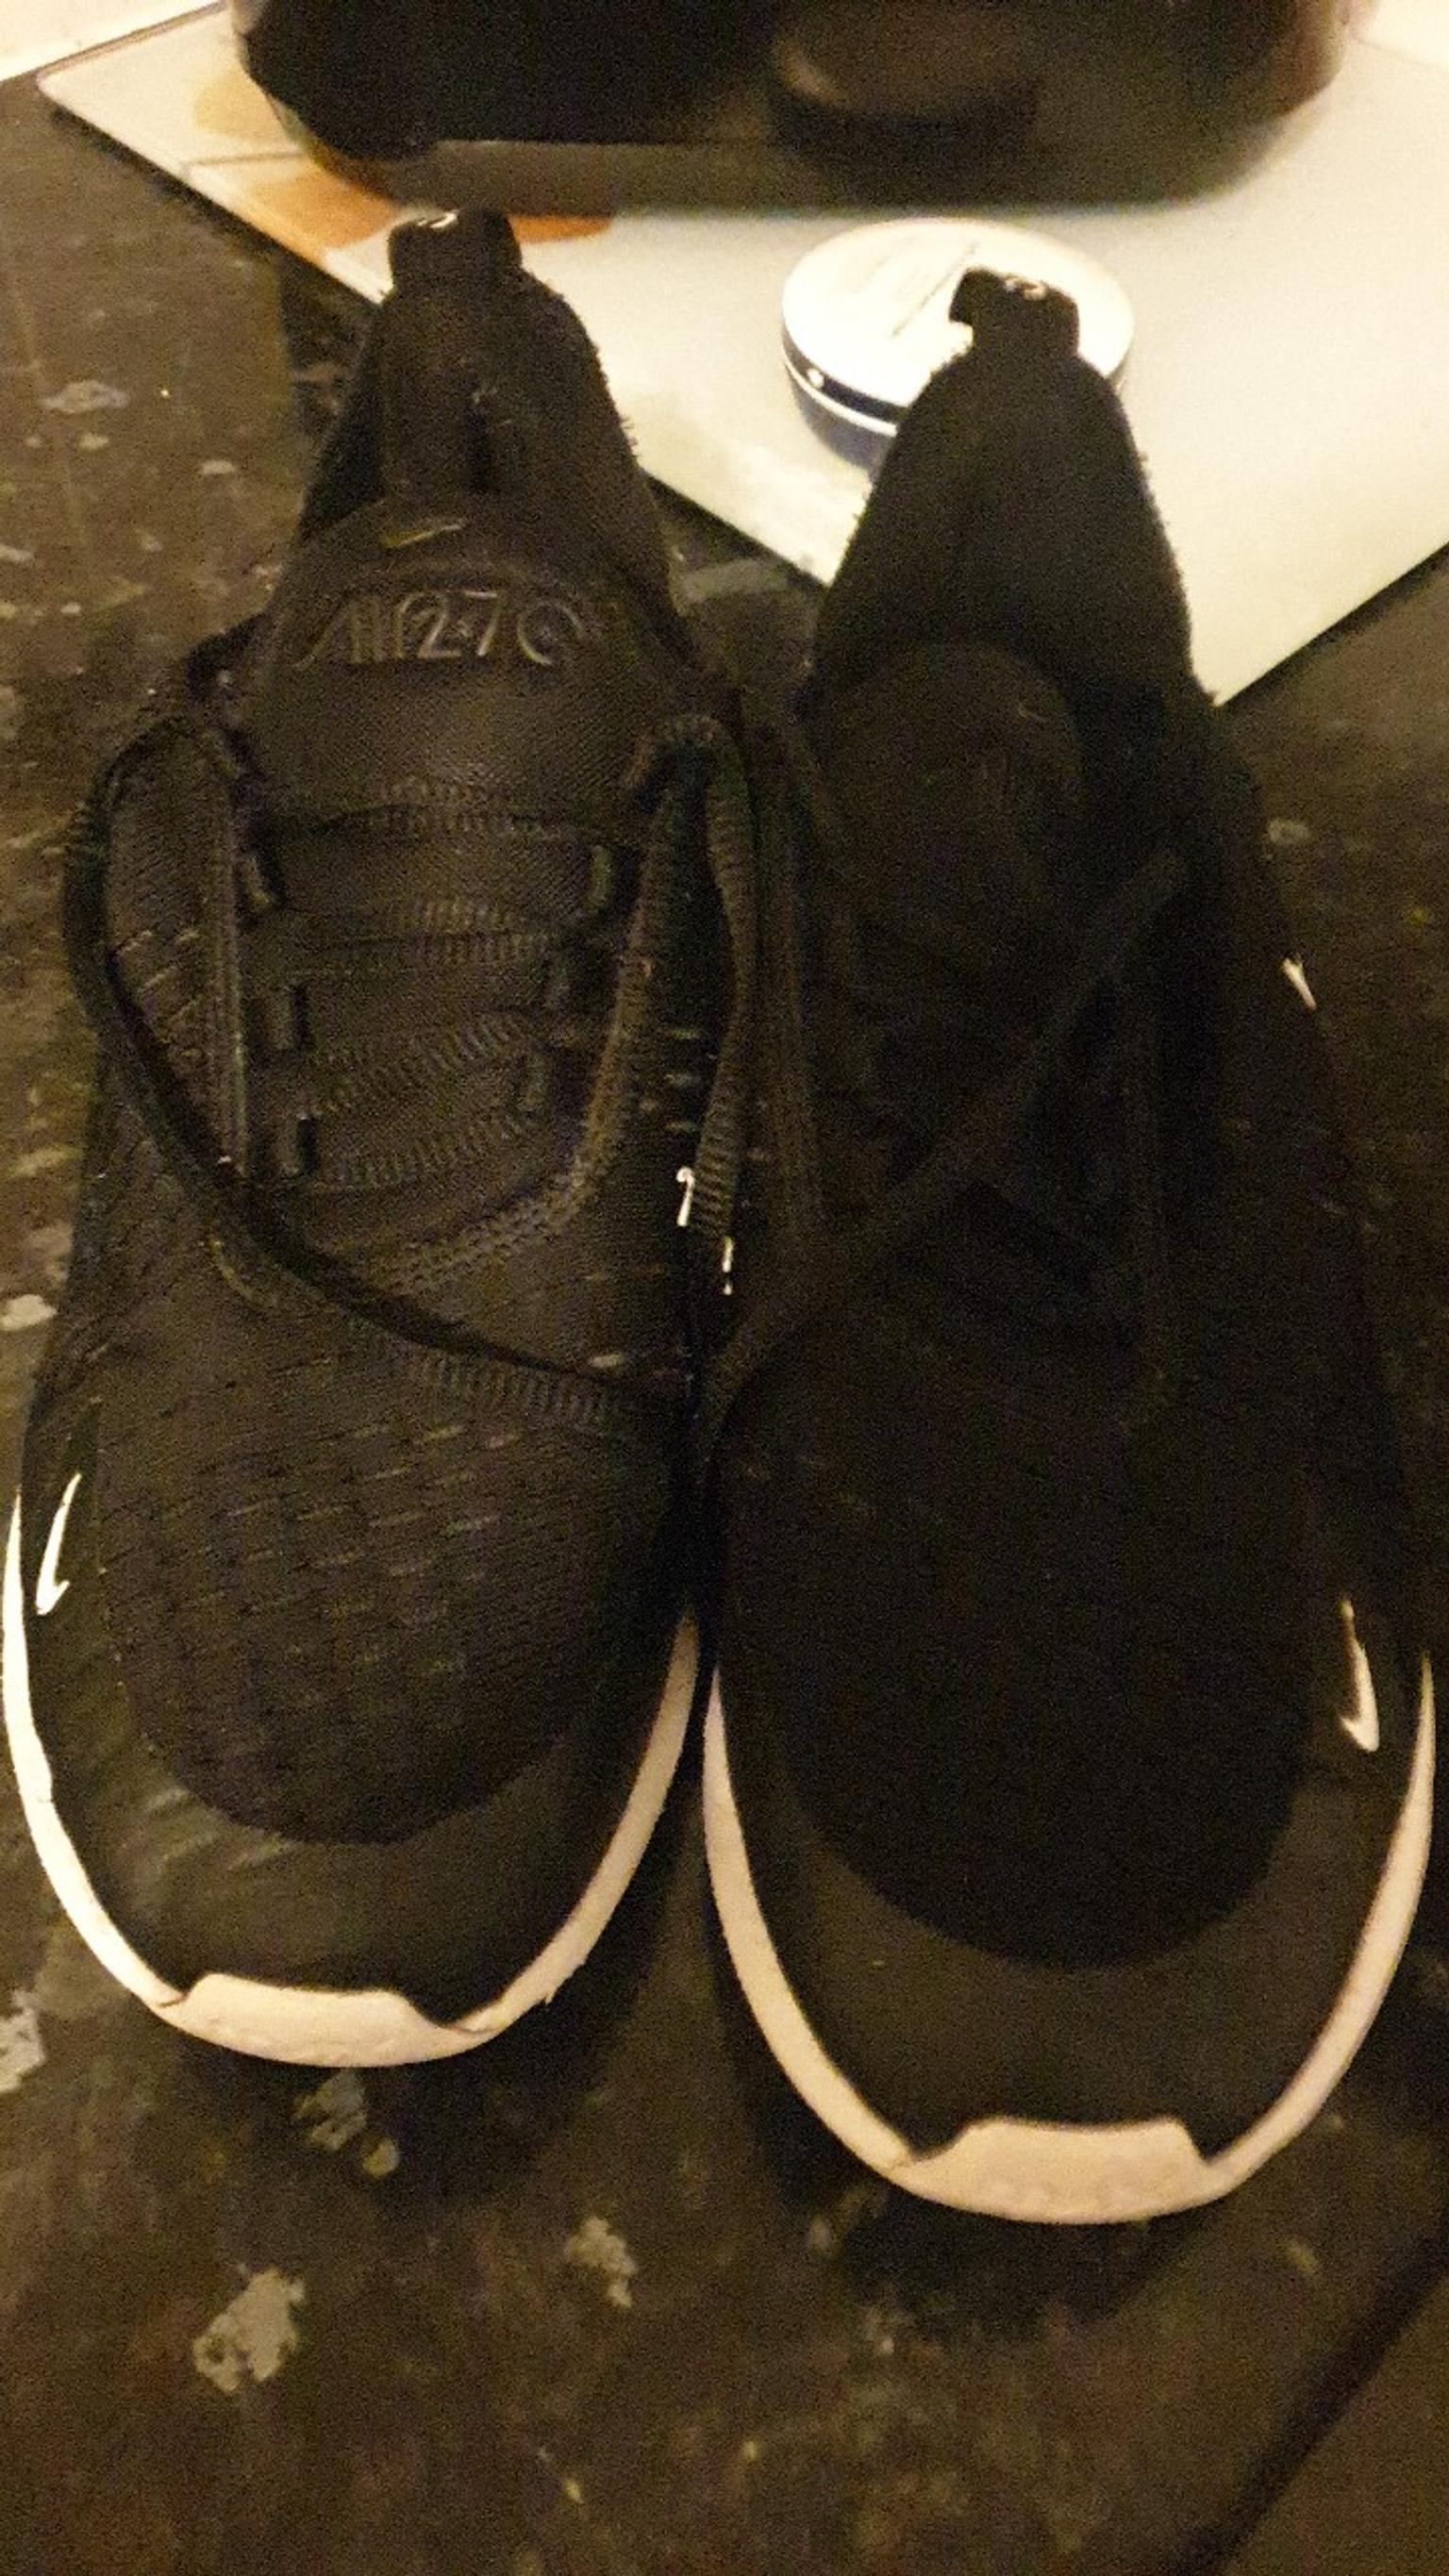 size 5 270 trainers